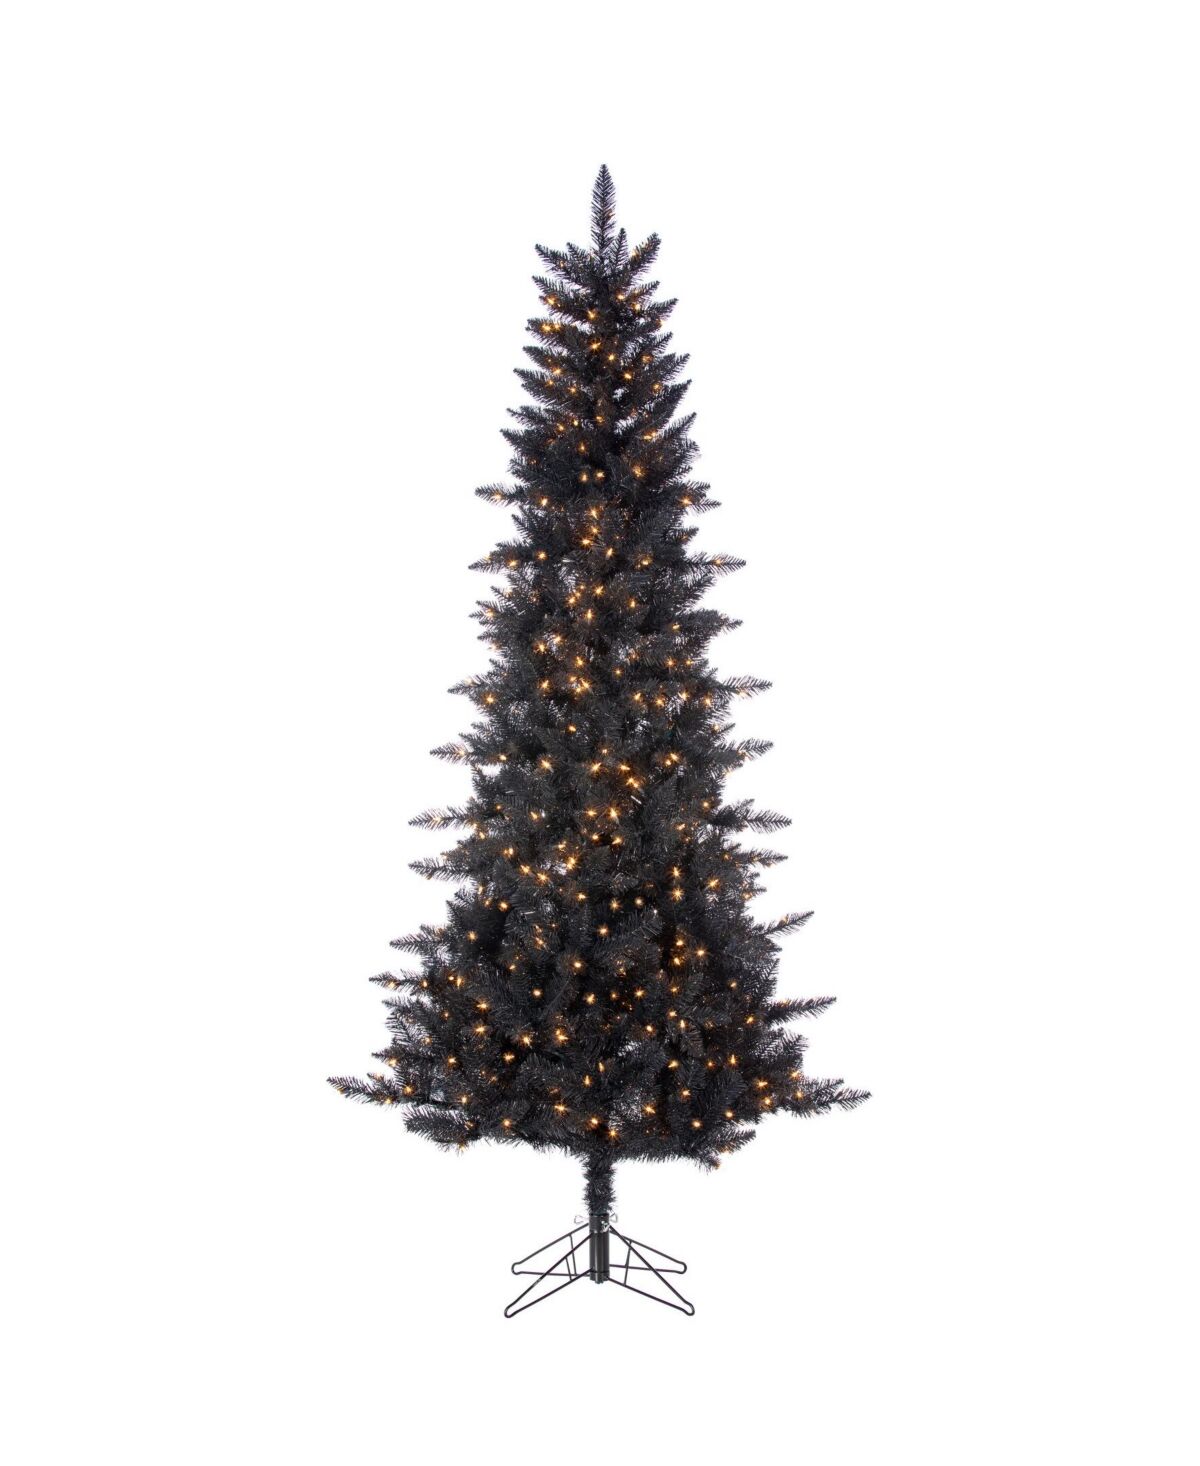 Gerson International 7.5' Tuscany Tinsel Tree with 450 Warm Incandescent Lights - Black